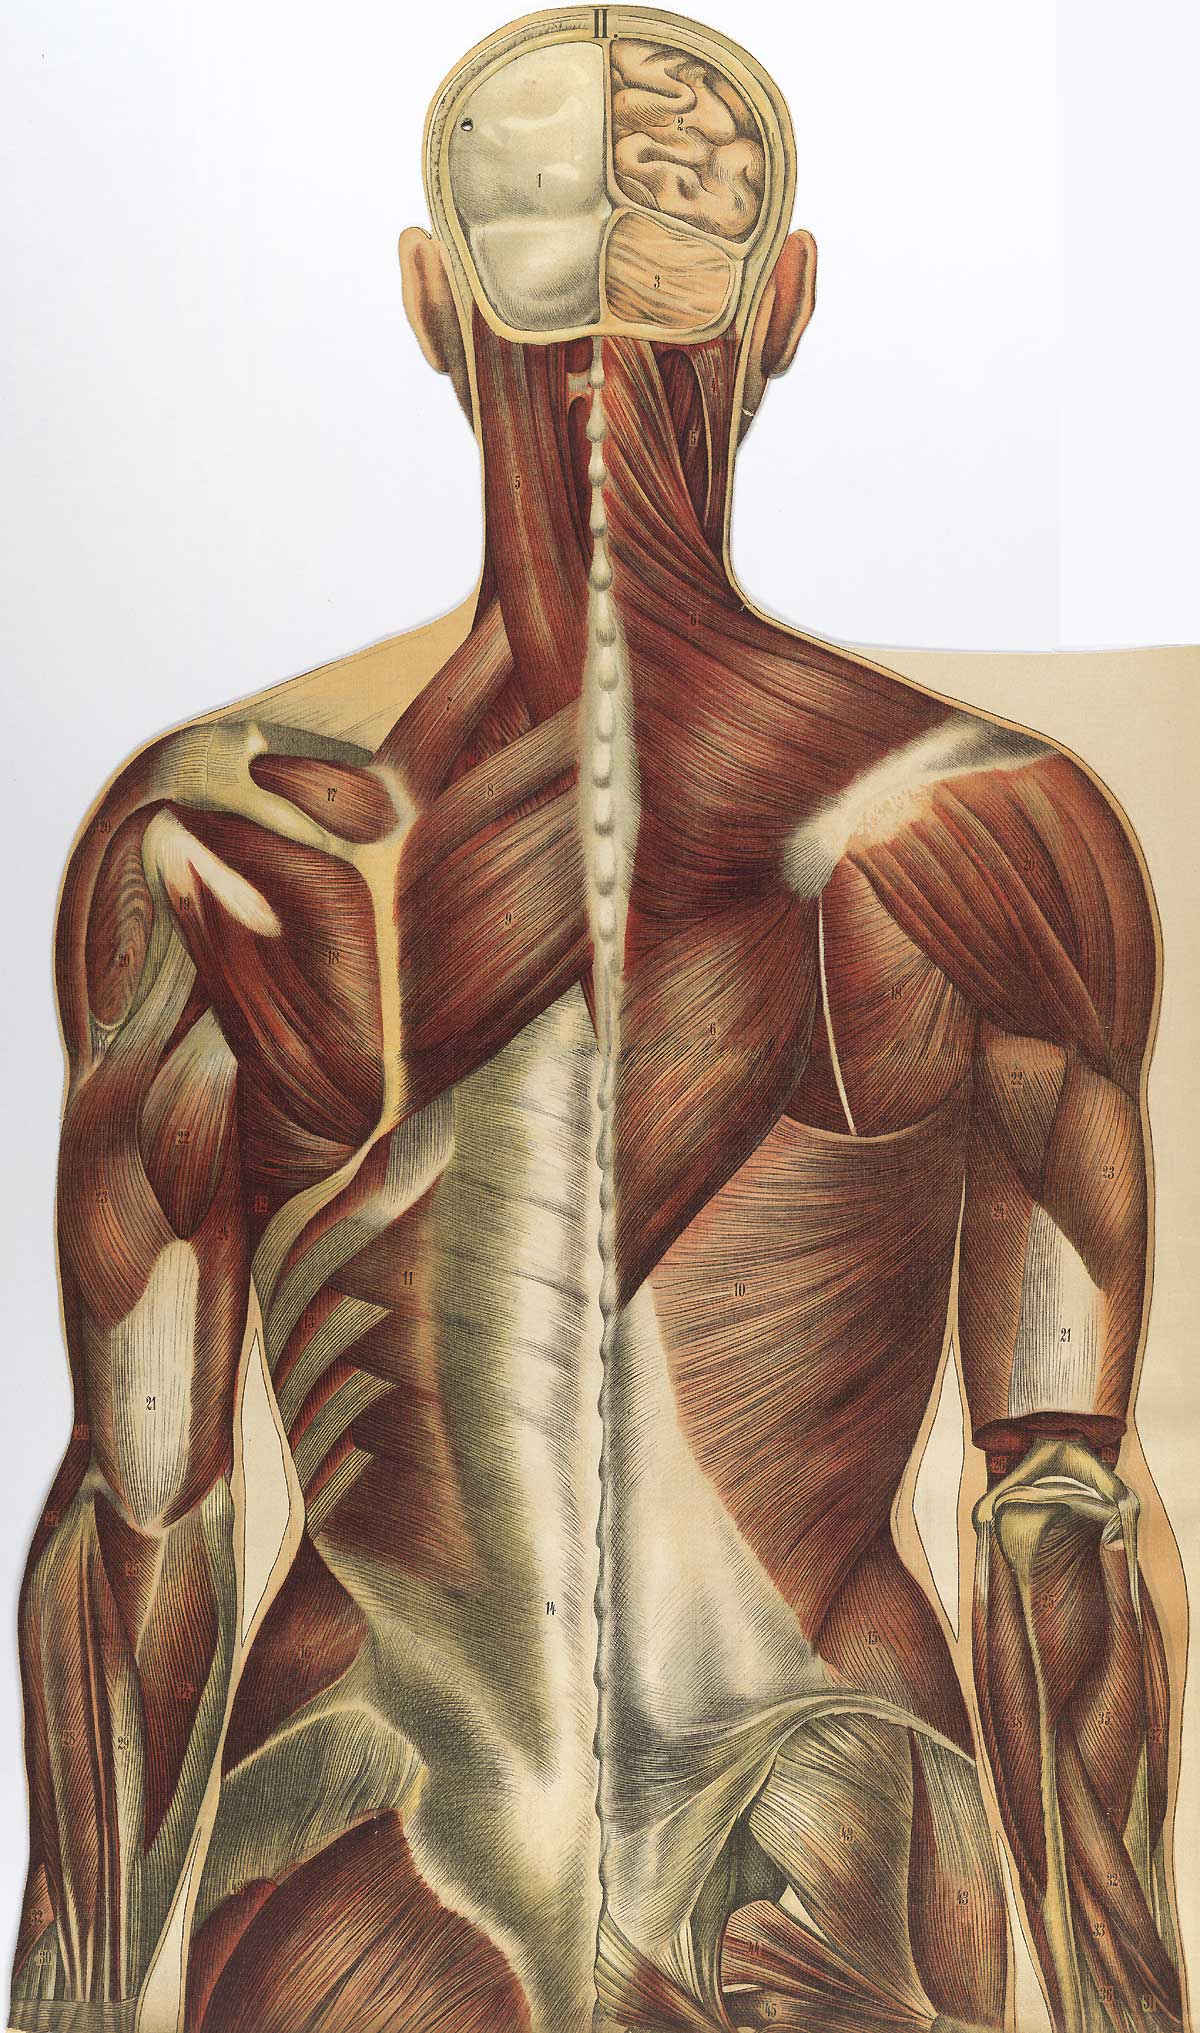 Chromolithograph showing the musculature of the upper half of the back of the human body, from Julien Bouglé’s Le corps humain en grandeur naturelle, NLM Call no. WE B758c 1899.